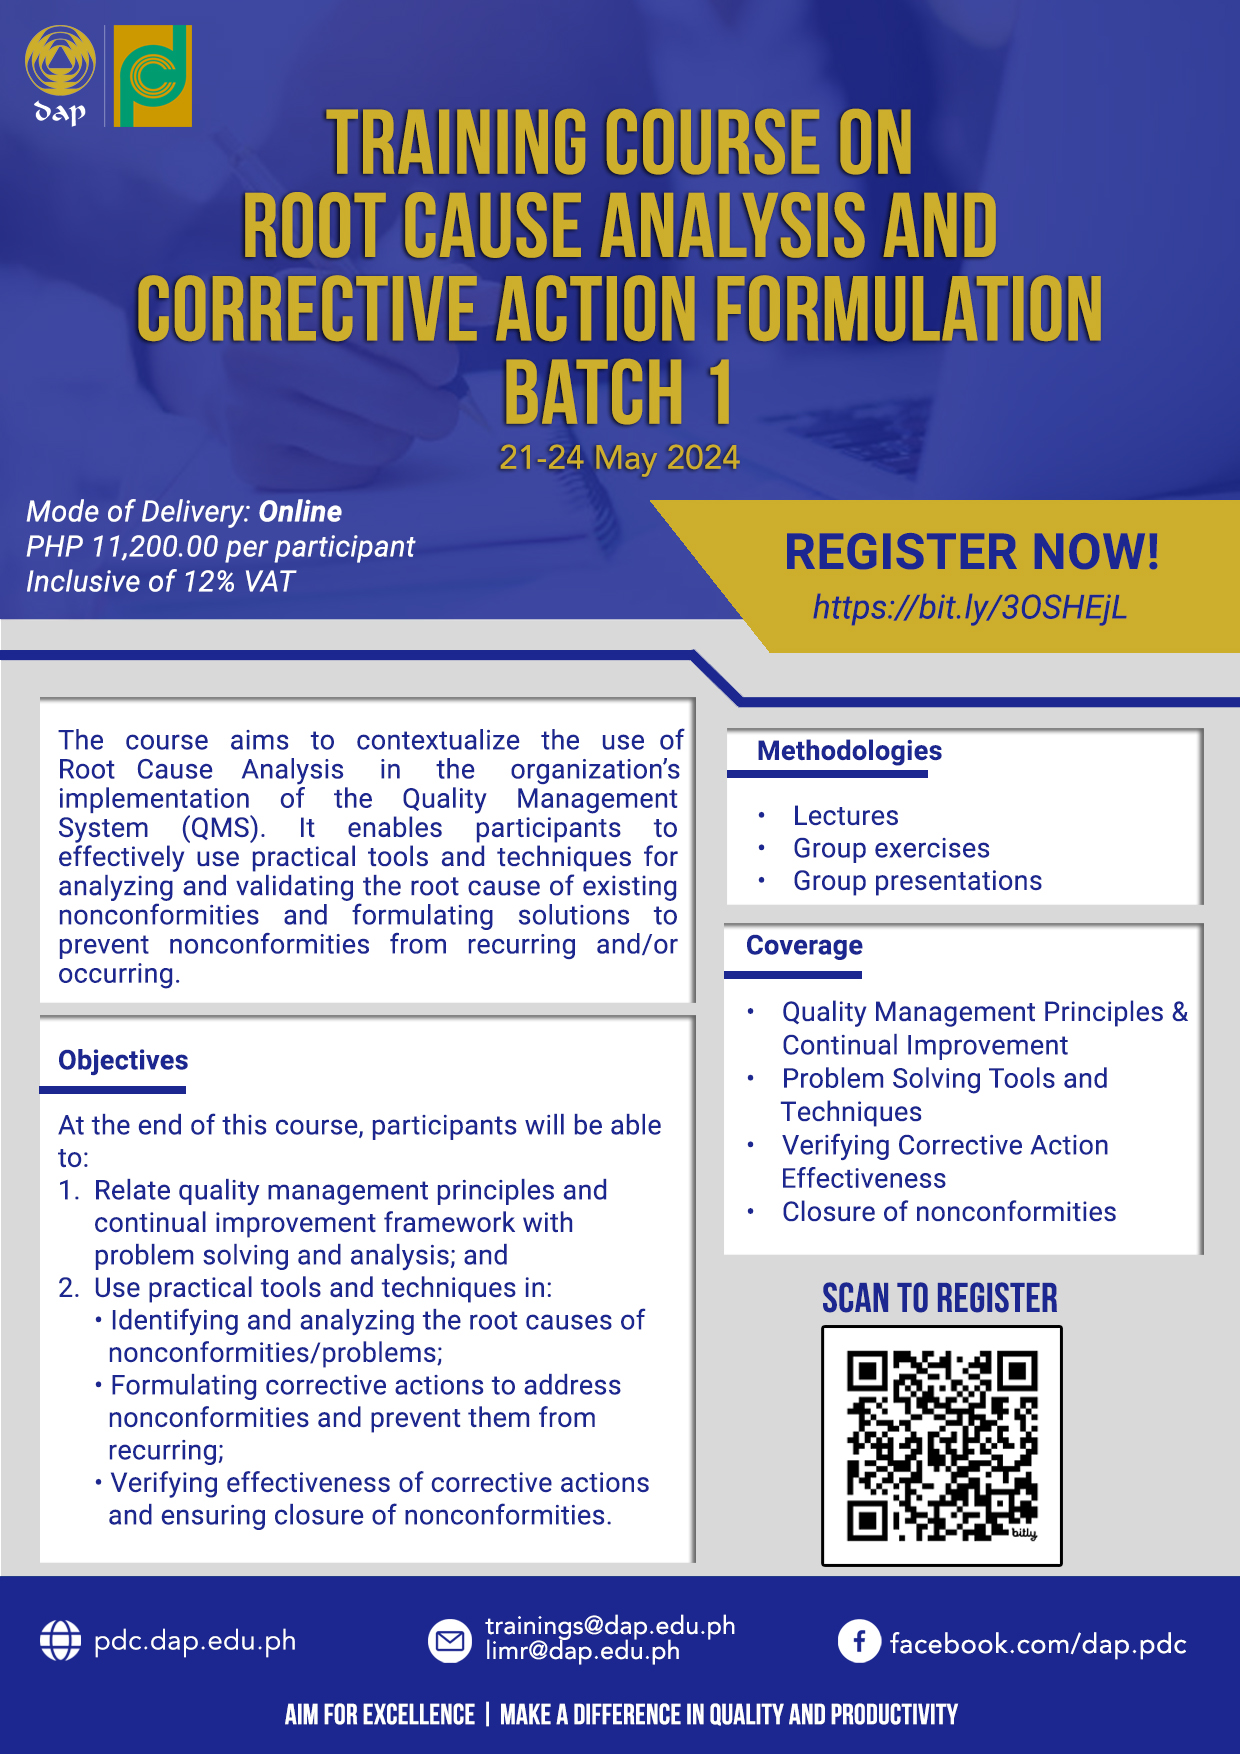 Training Course on Root Cause Analysis and Corrective Action Formulation (Batch 1) - Online